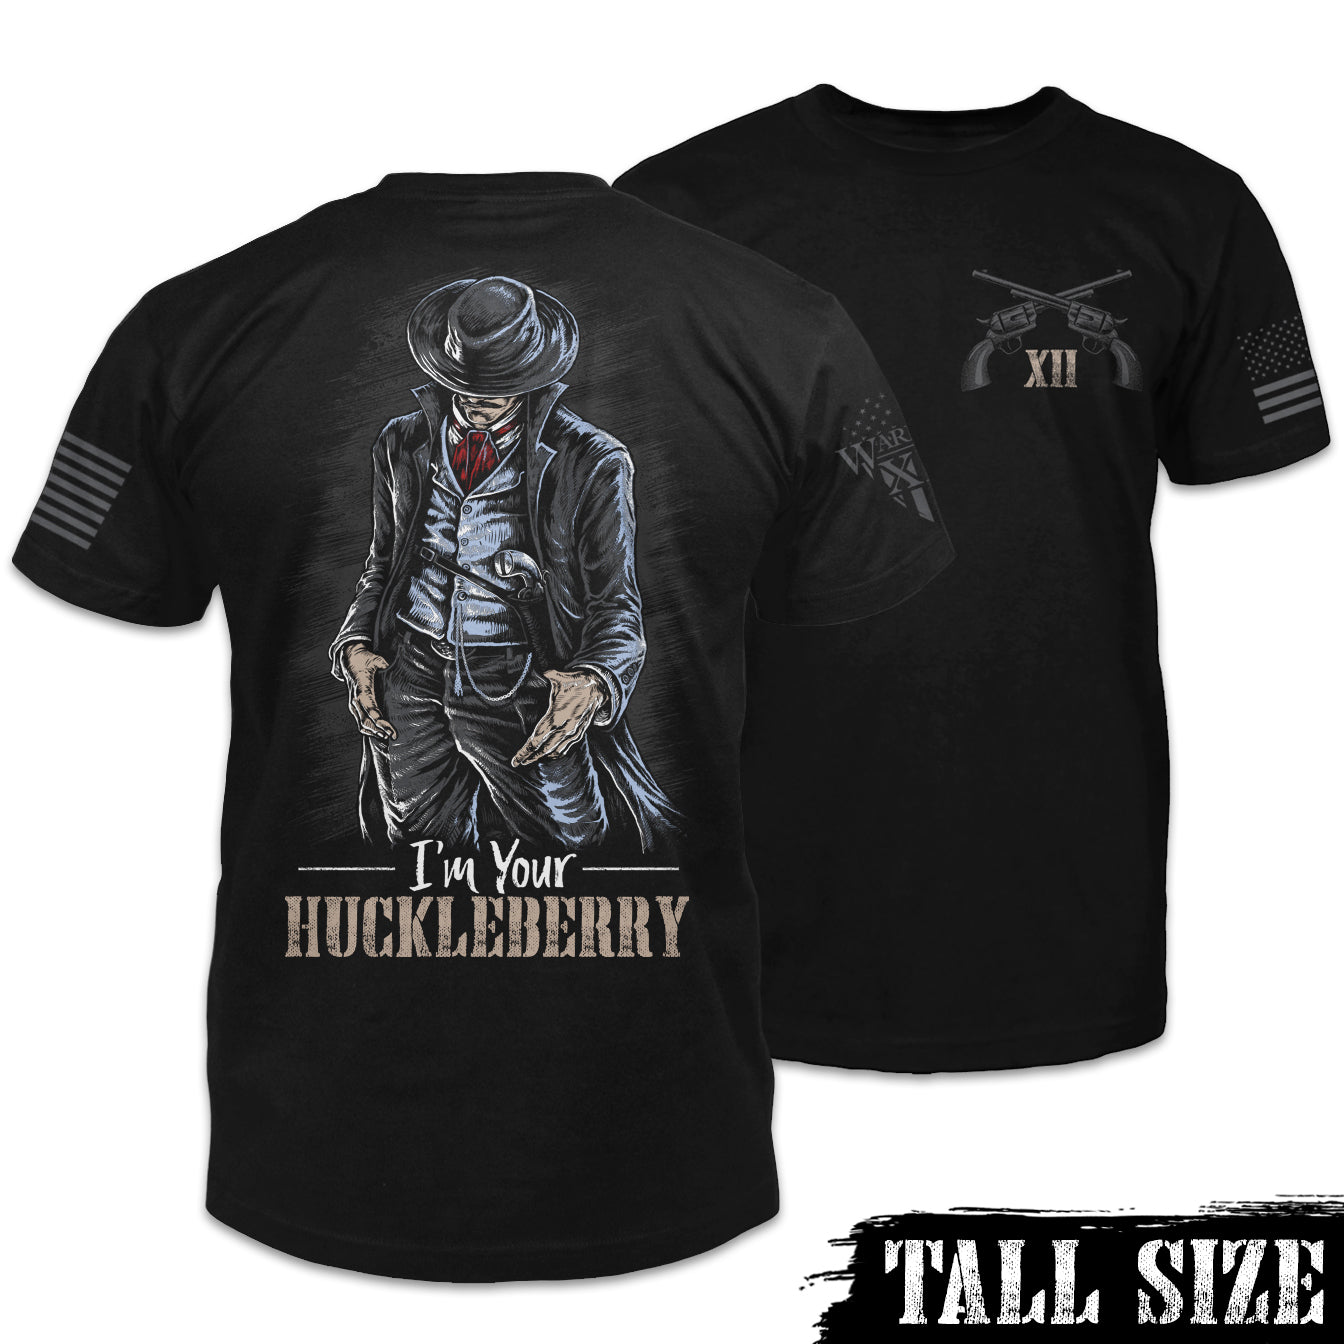 Front & back black tall size shirt with the words "I'm your Huckleberry" with a cowboy printed on the shirt.